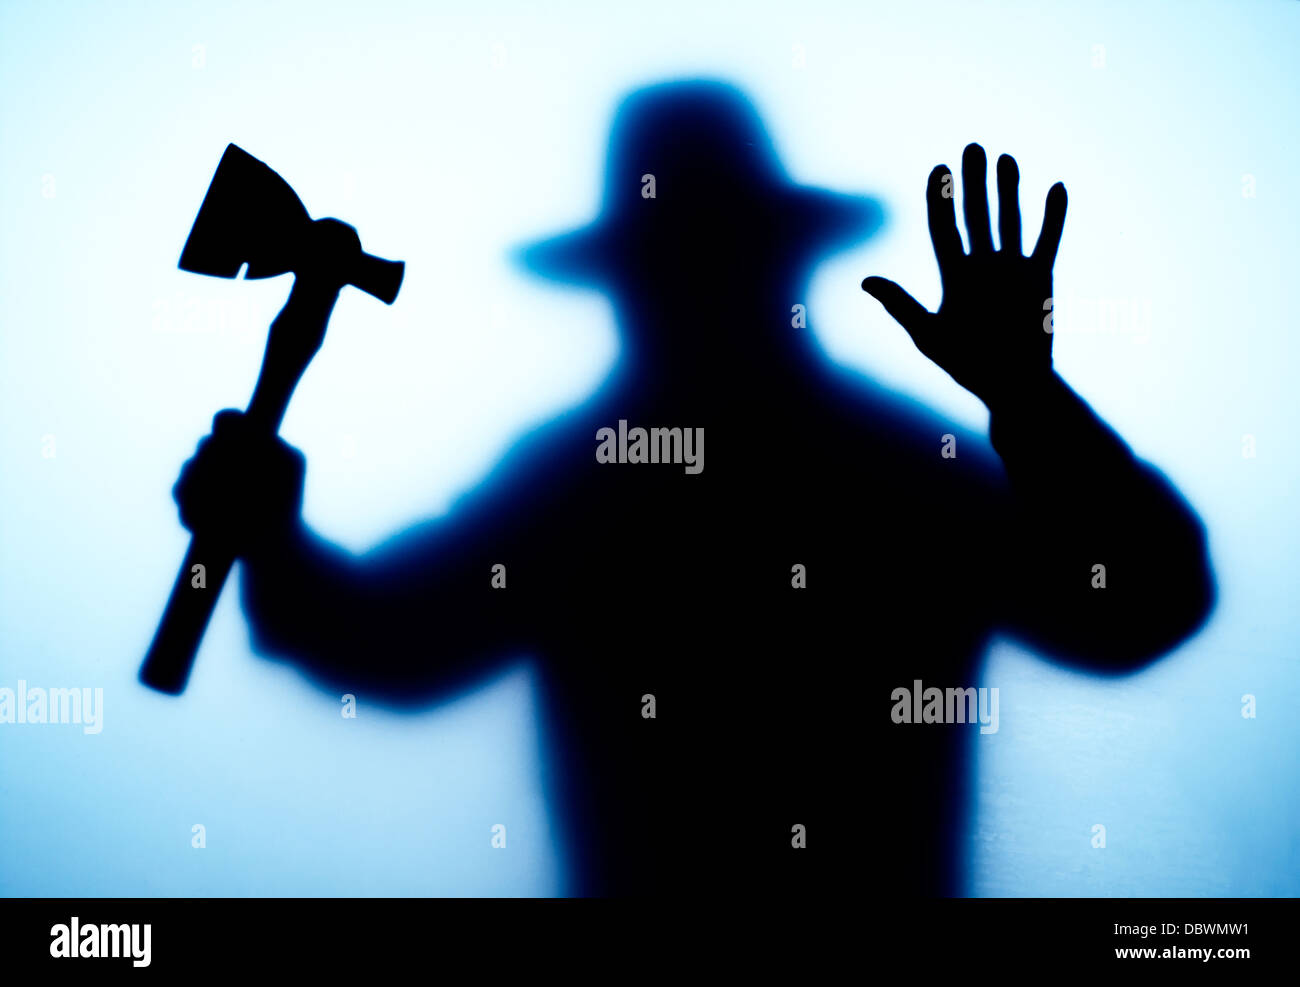 computer generated stalker bad guy with hatchet threatening pose Stock Photo